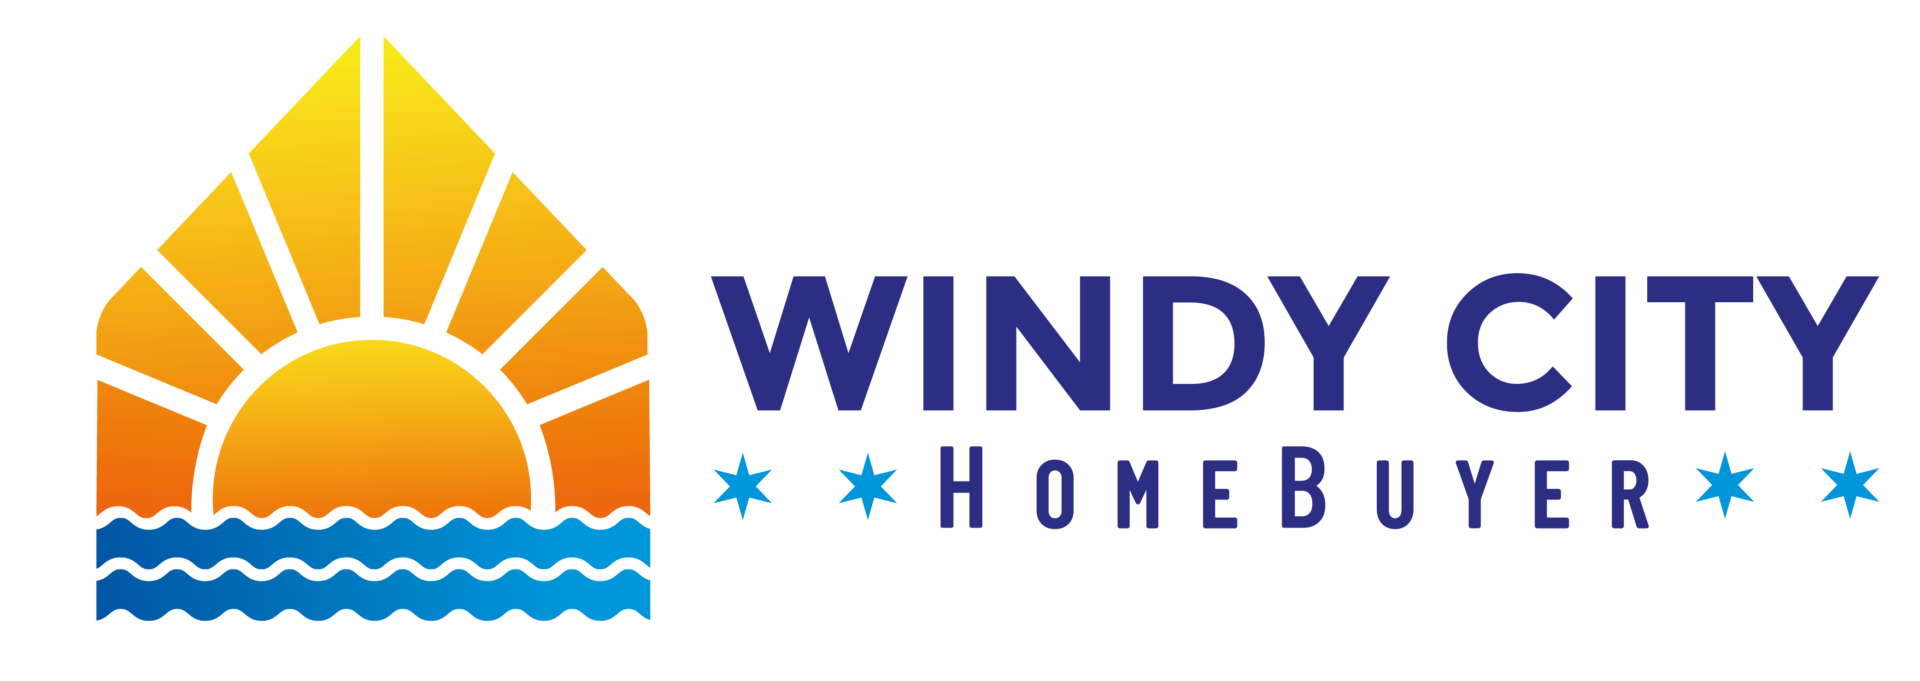 Windy City Home Buyer – We Buy Houses Fast for Cash! logo